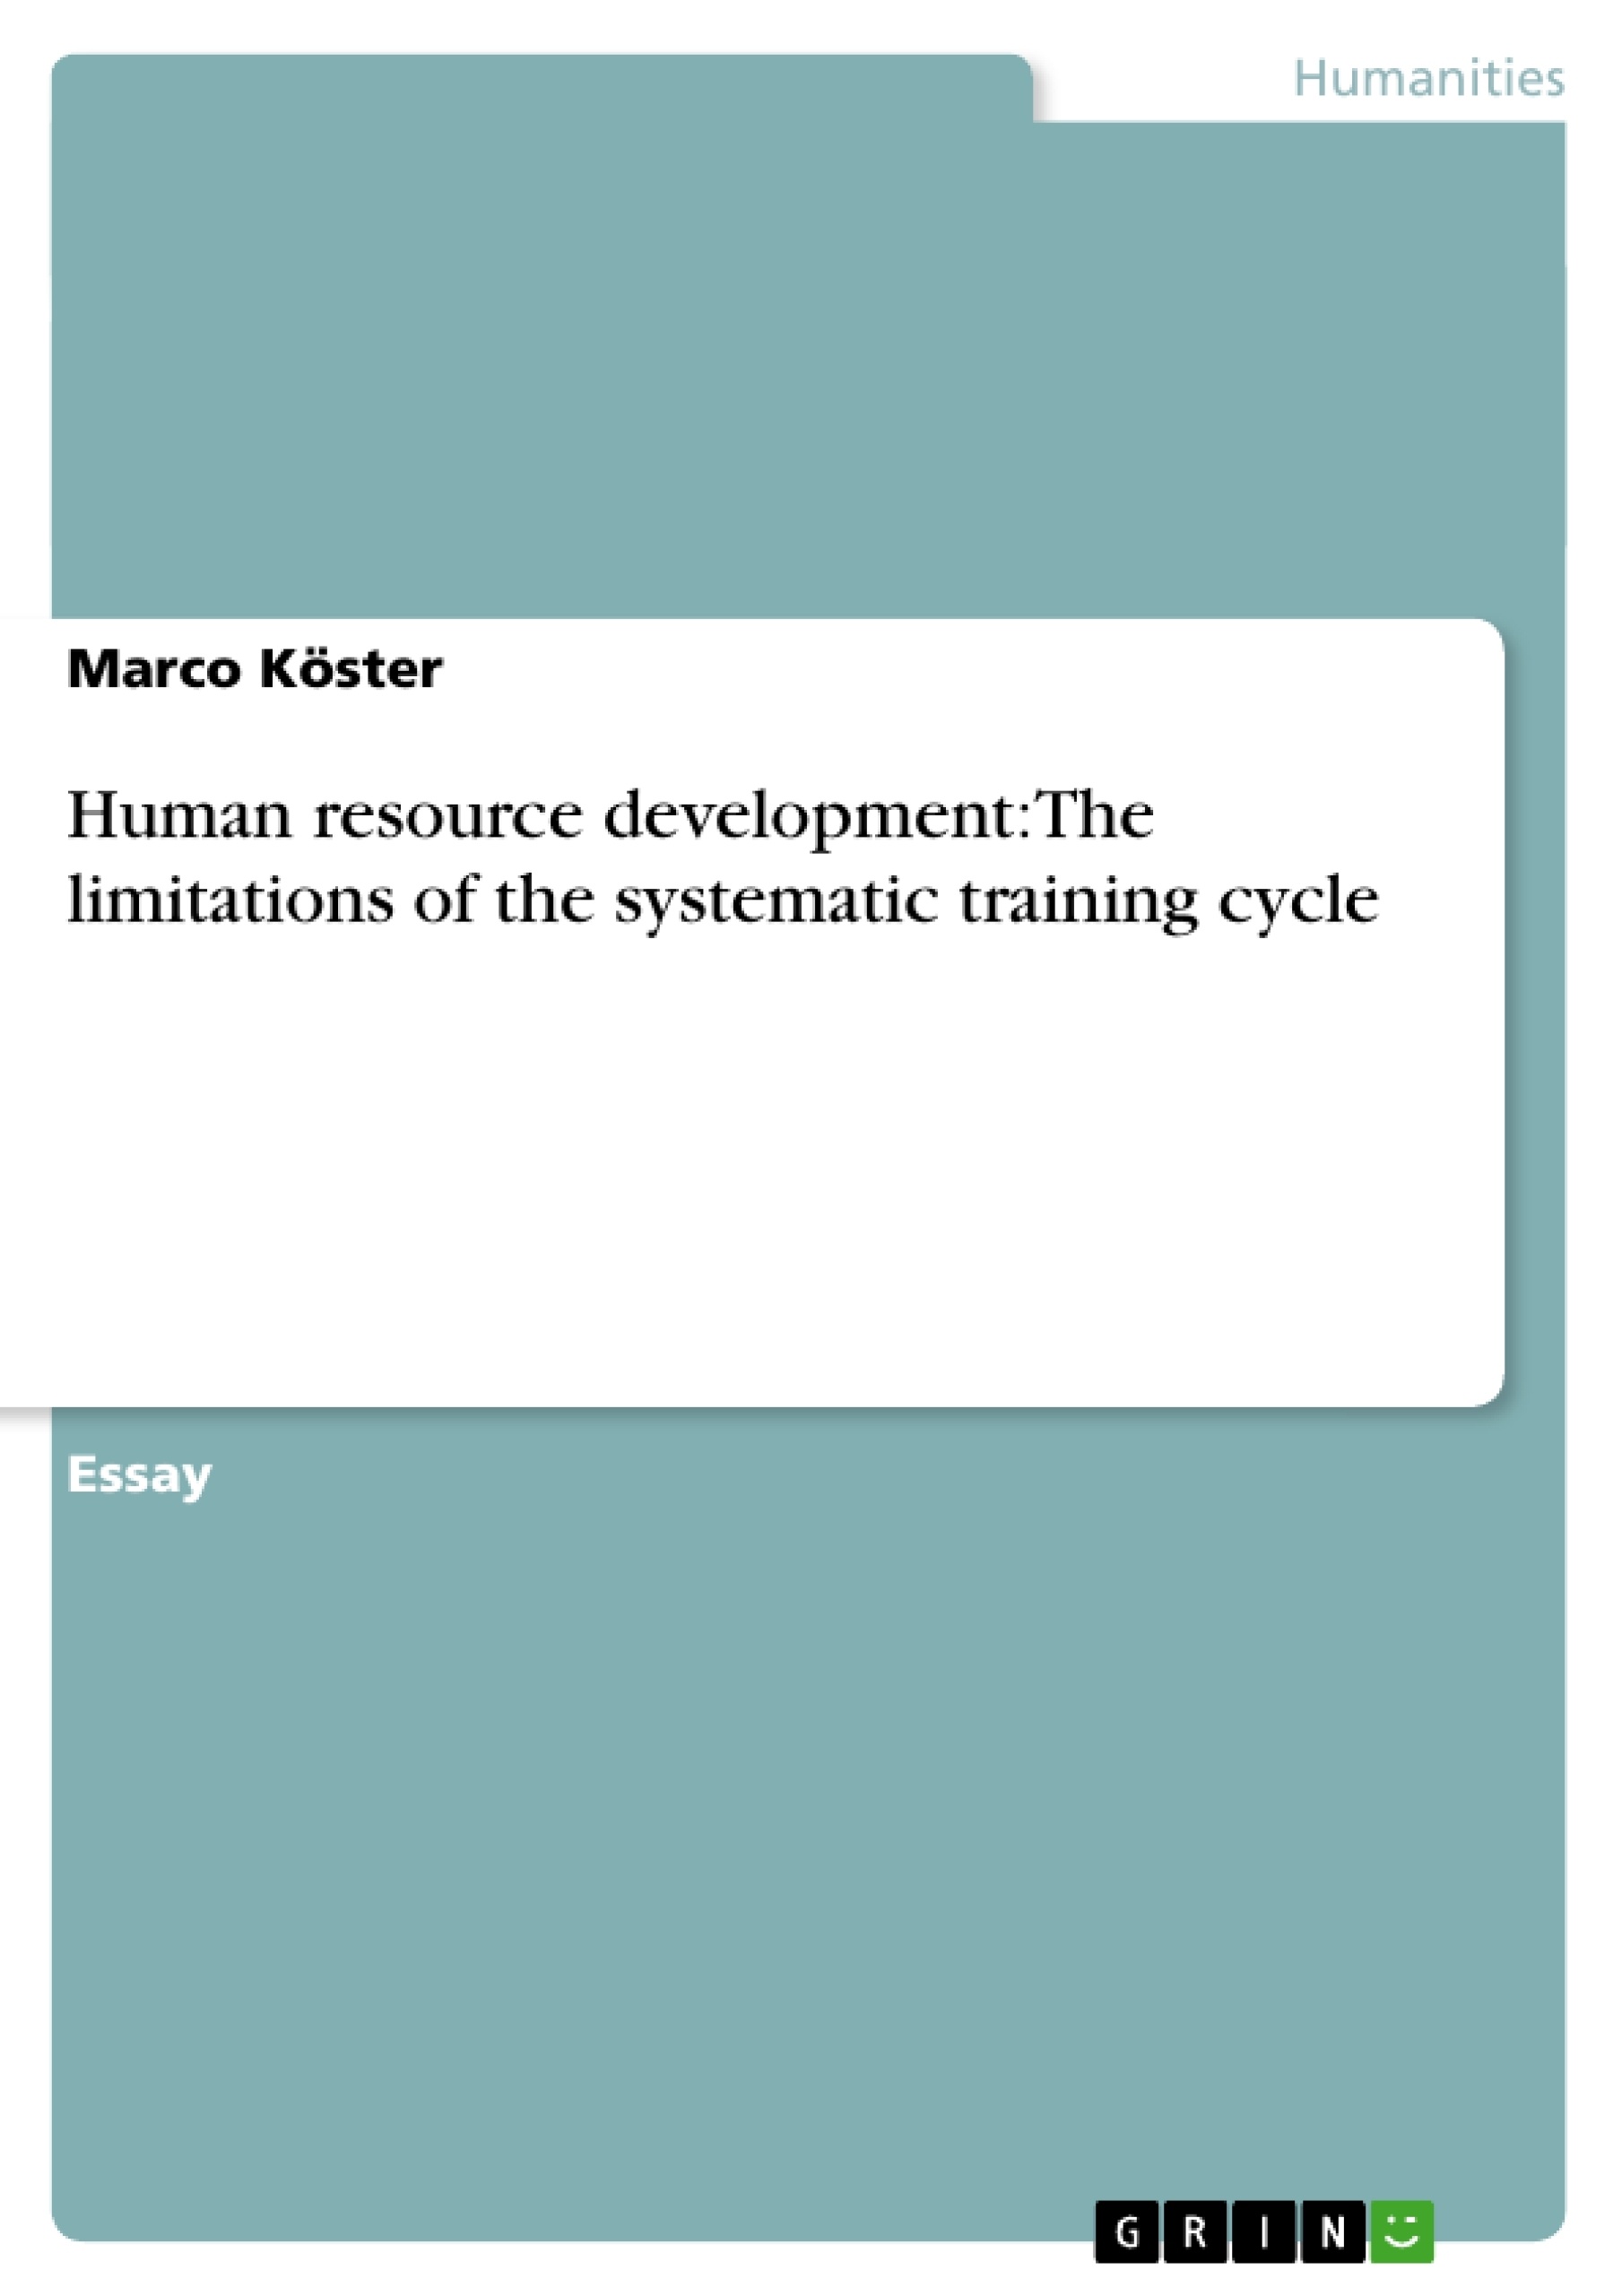 Título: Human resource development:The limitations of the systematic training cycle